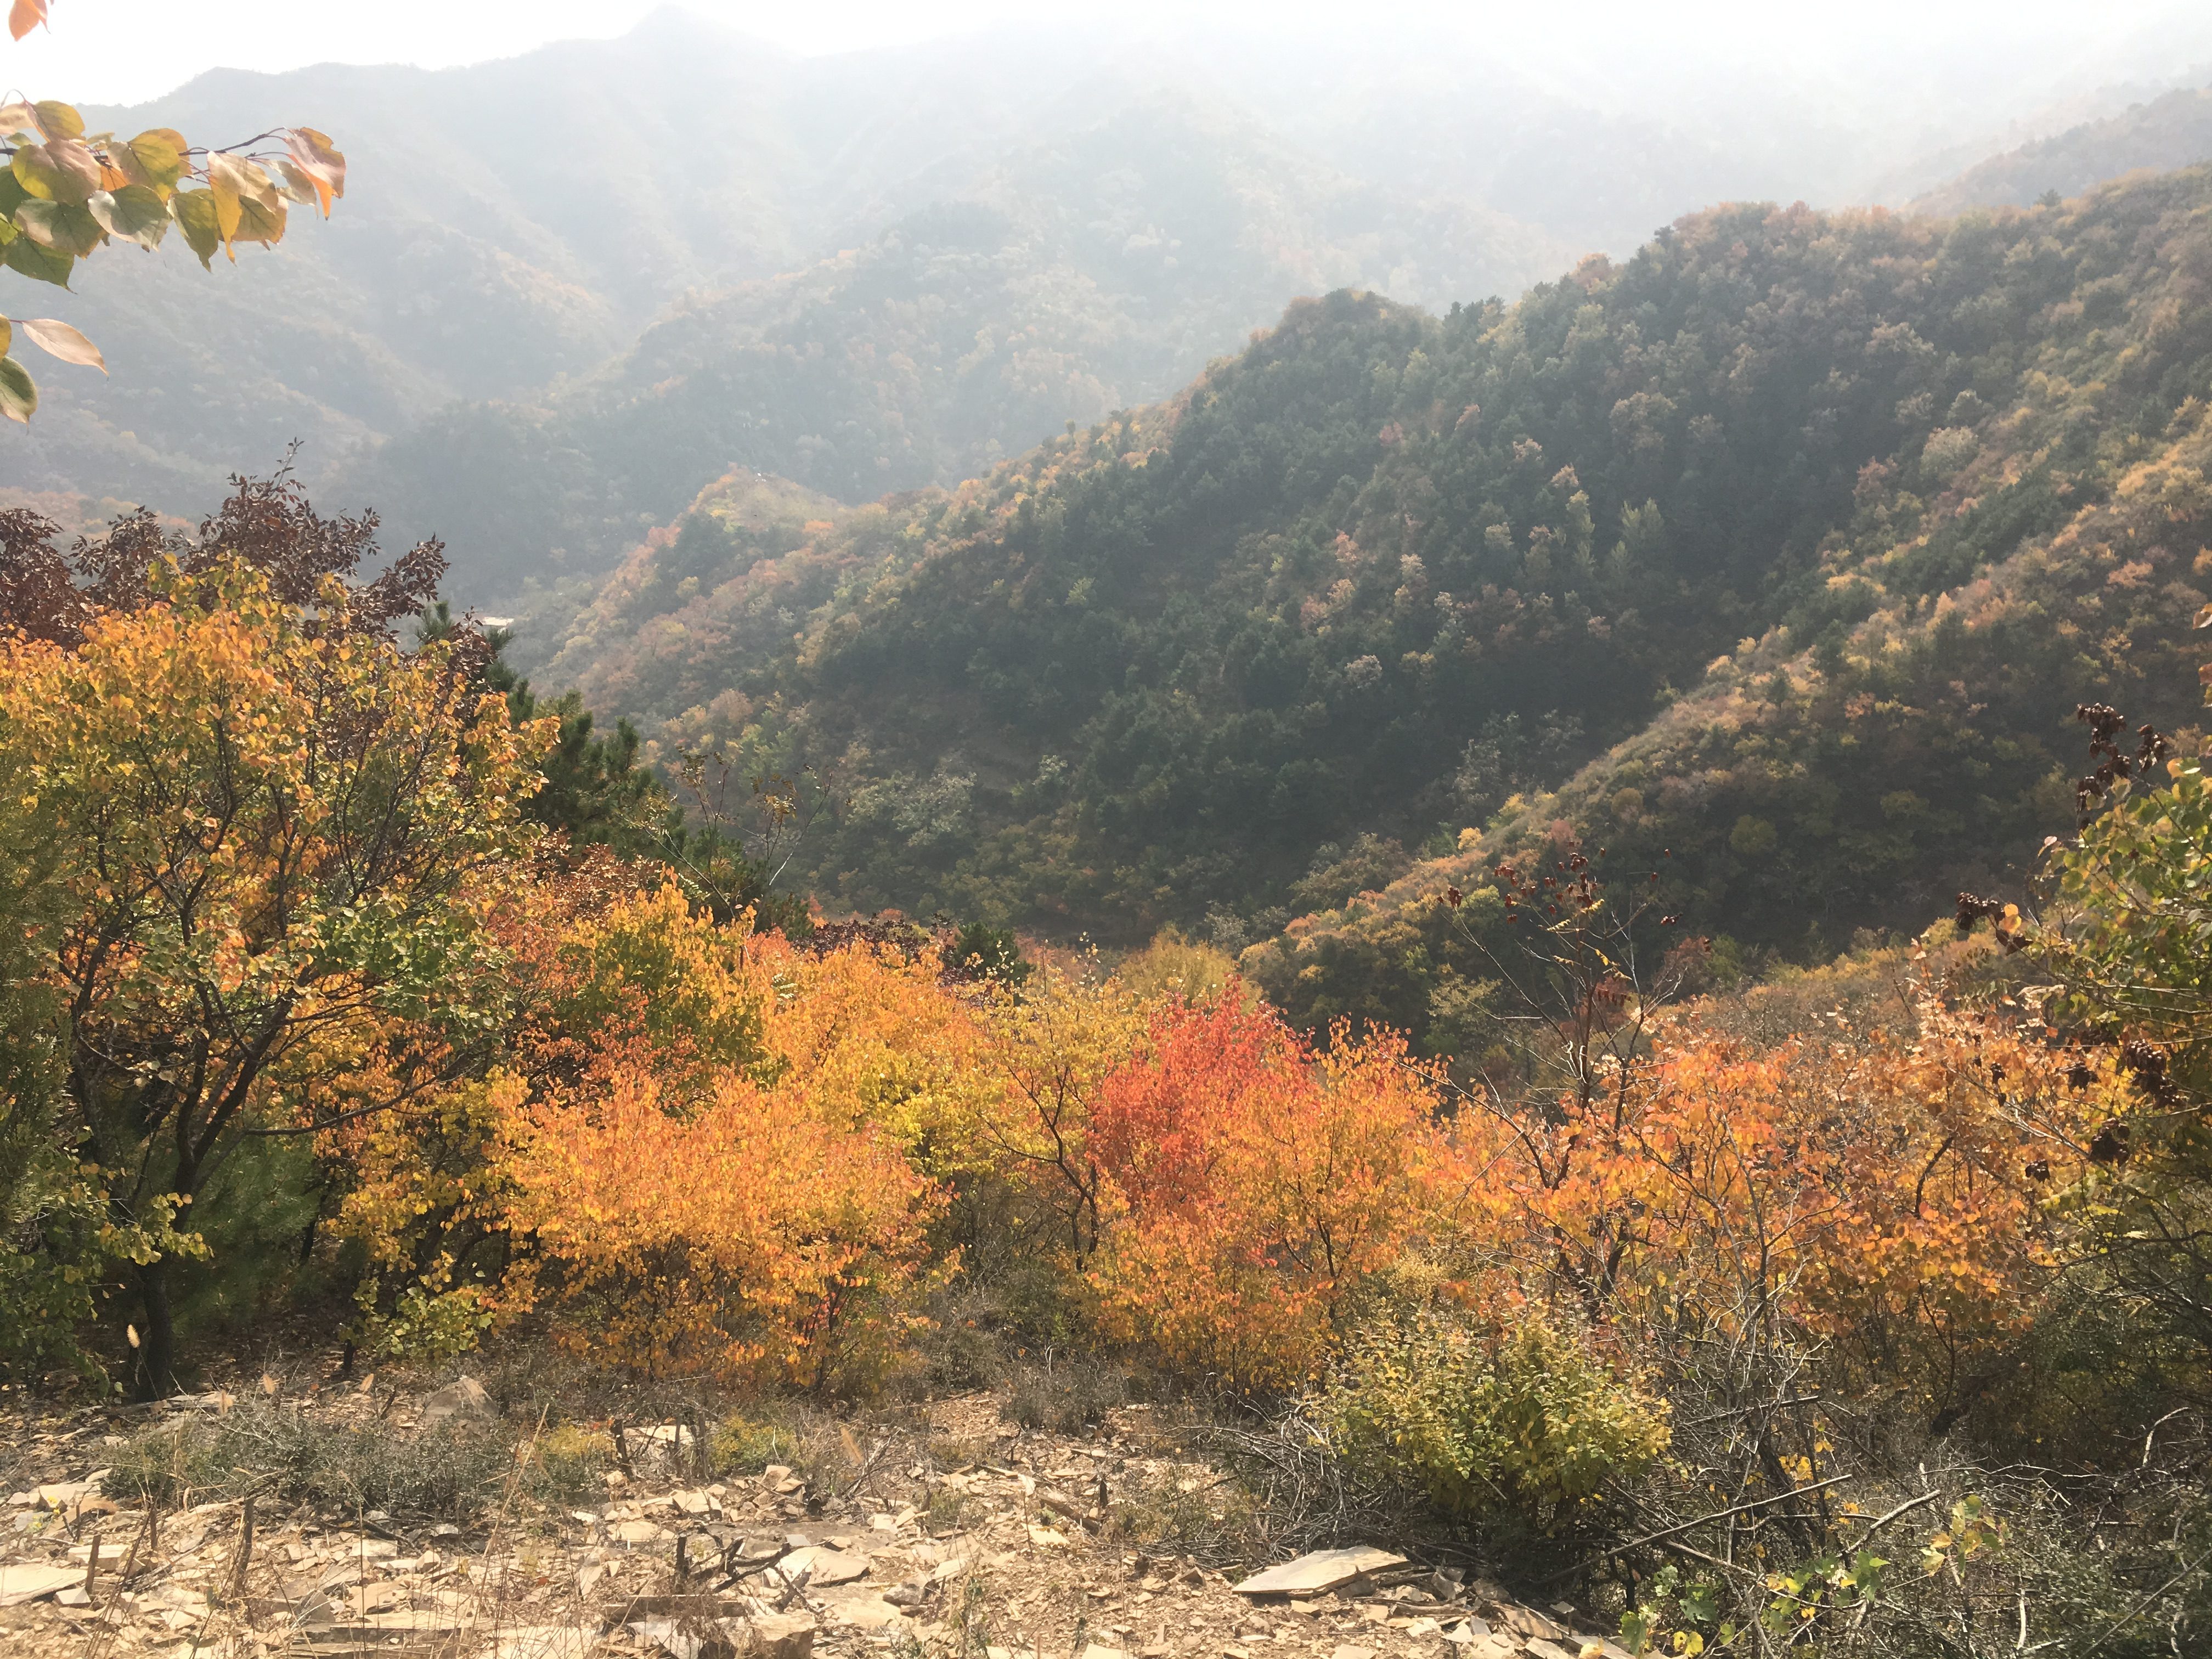 More autumn tones around the Great Wall environs